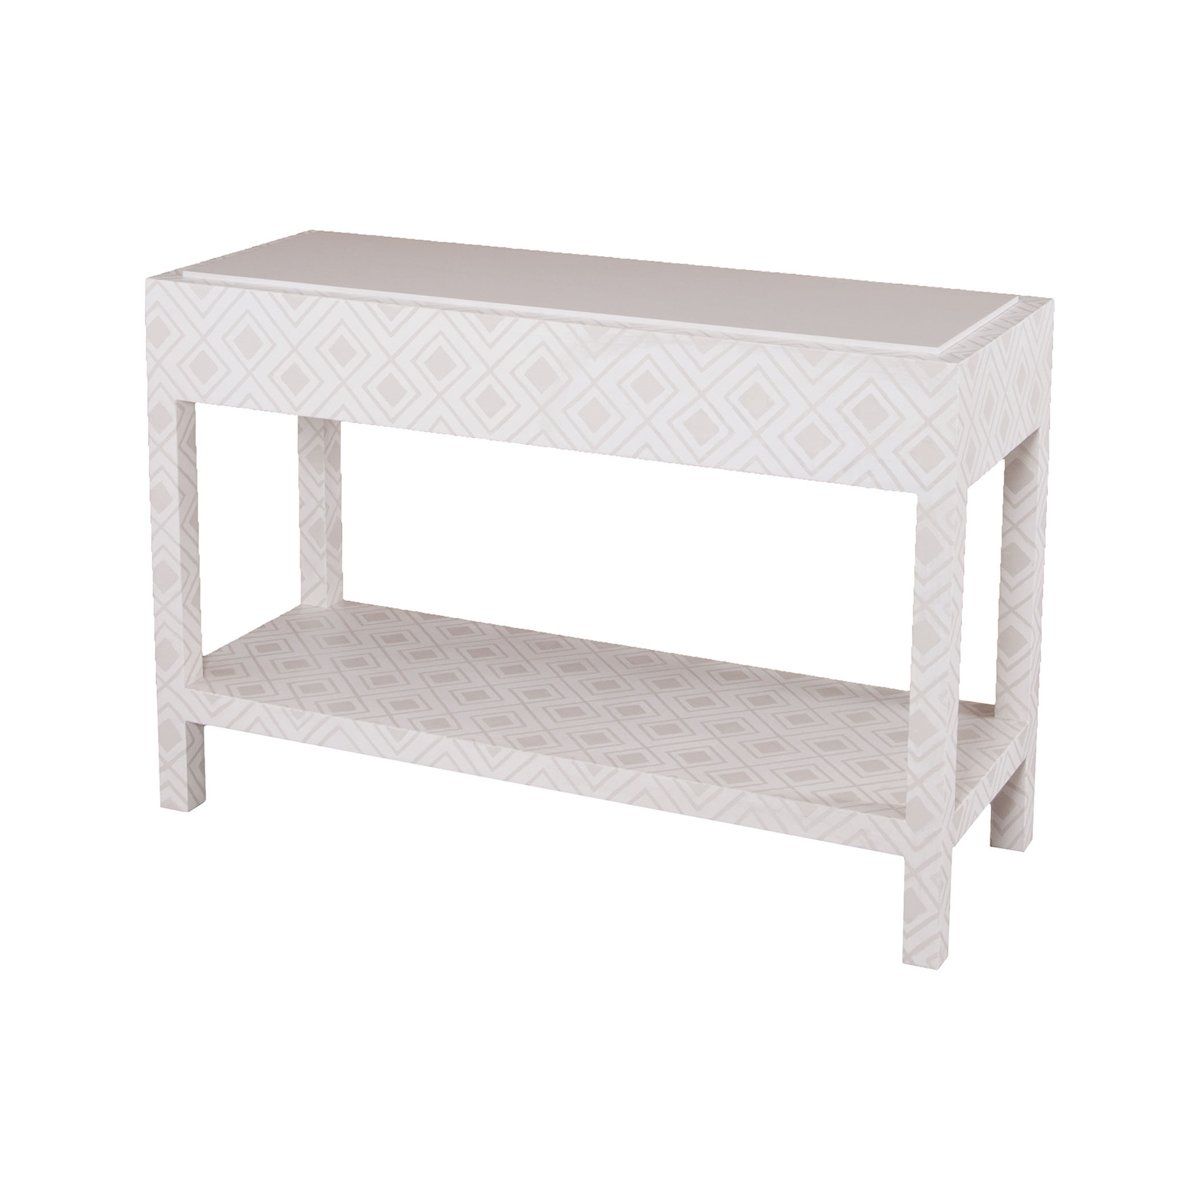 Kent Fabric Wrapped Console | Products In 2018 | Pinterest Within Parsons Grey Marble Top & Dark Steel Base 48x16 Console Tables (View 21 of 30)